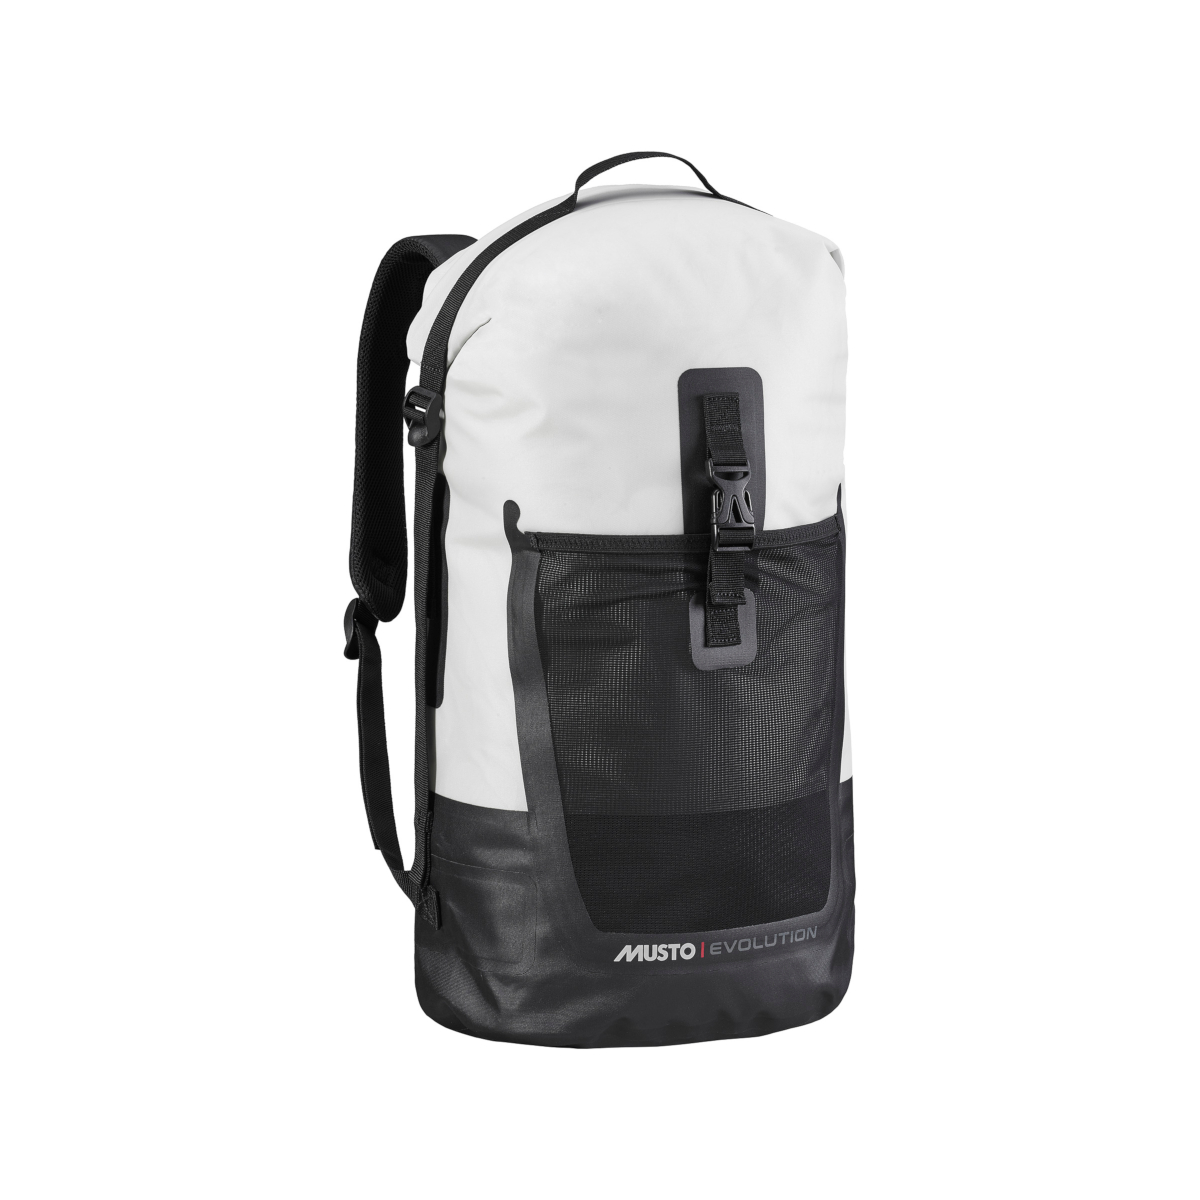 Musto Evolution Dry Backpack Sac à dos voile 40L gris clair